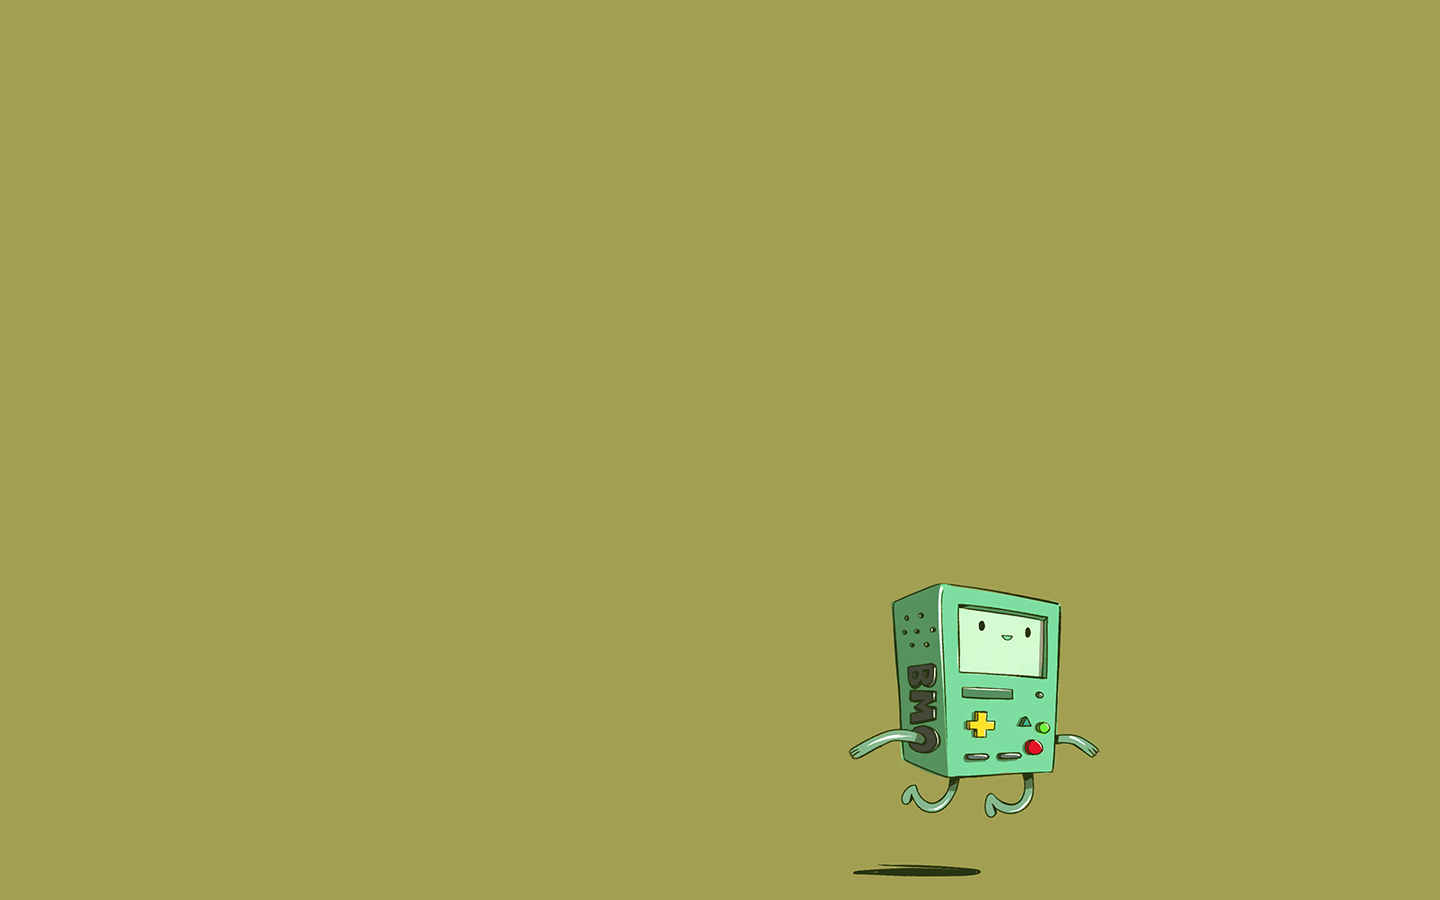 Just 3 Adventure Time Wallpaper I made out of people's art